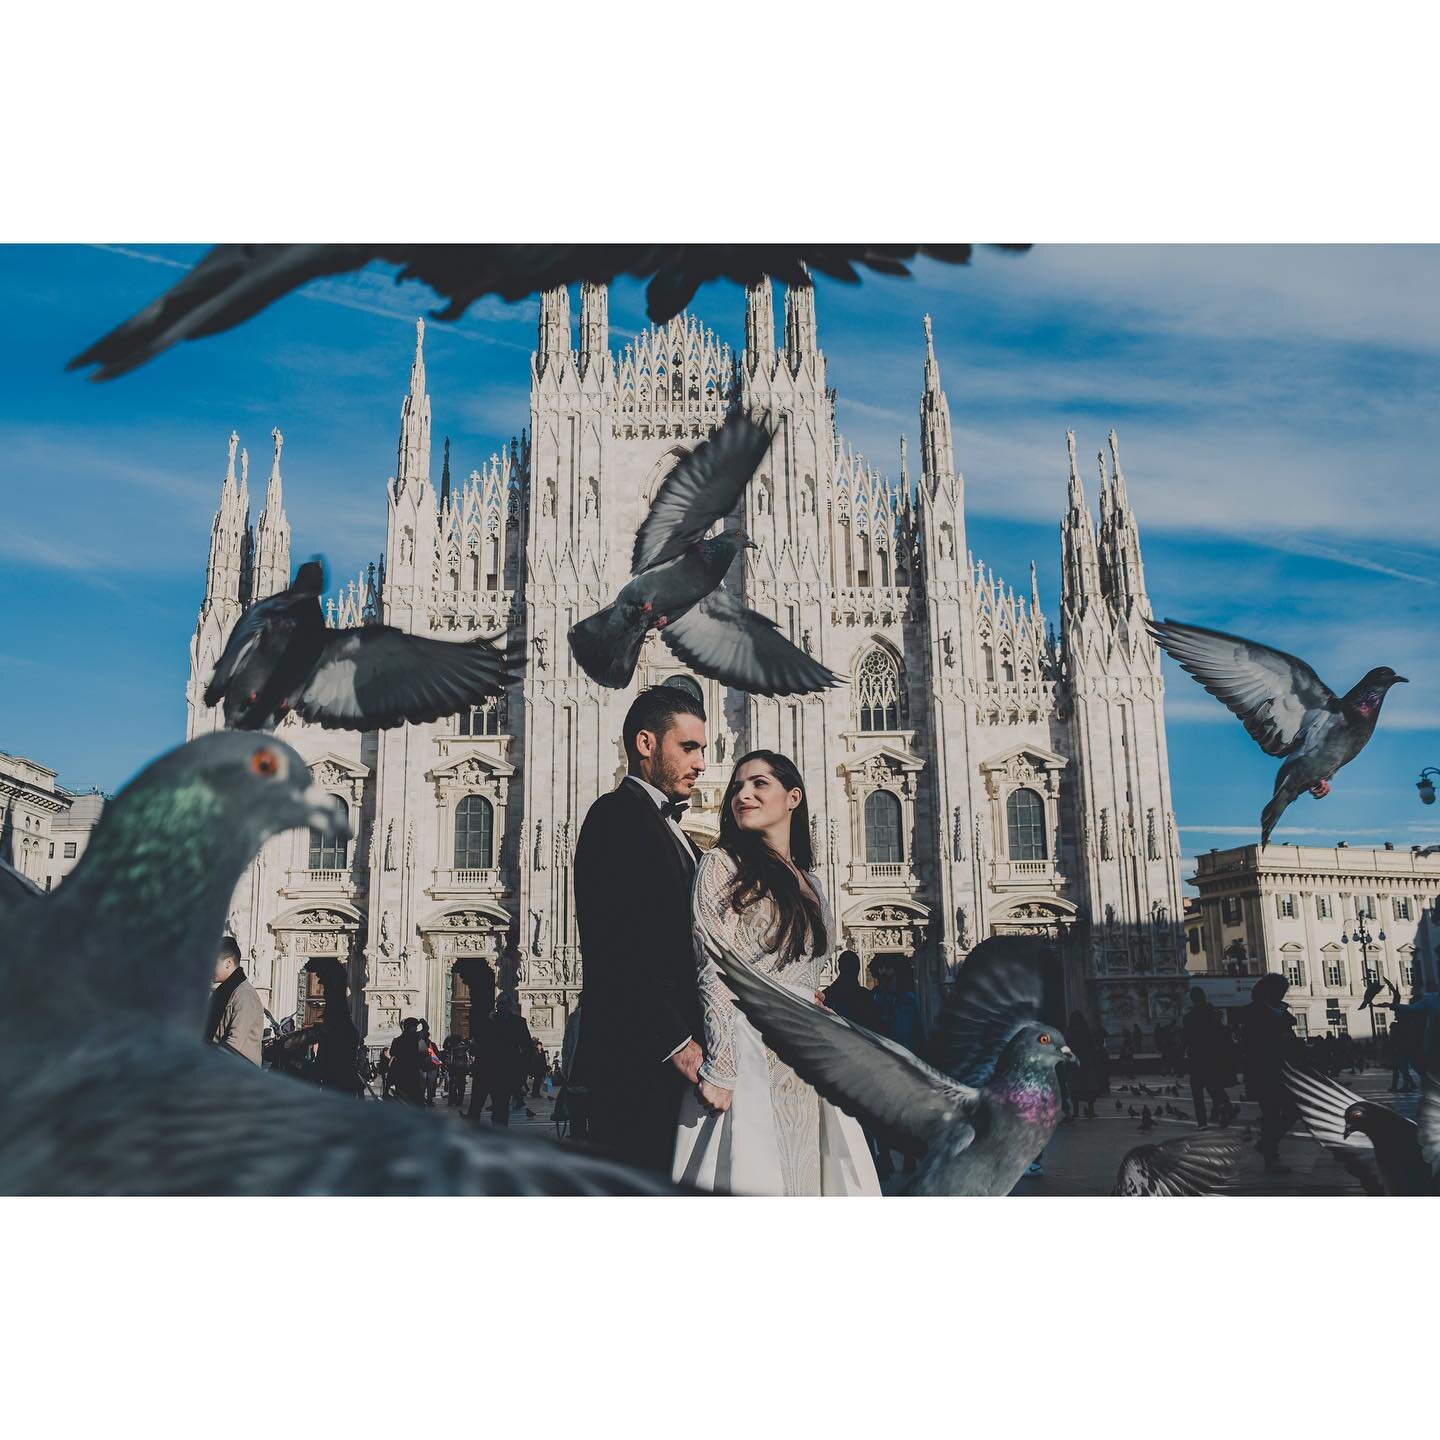 Milan, Italy: On the Duomo Square there are about 1322 pigeons. To have them flying in this photo we had to feed half of them!!!! 😂 It was so worth it! So worth it &hearts;️ Amazing couple!!! Unforgettable memories :) #milan #italy #photoexpertsmagi